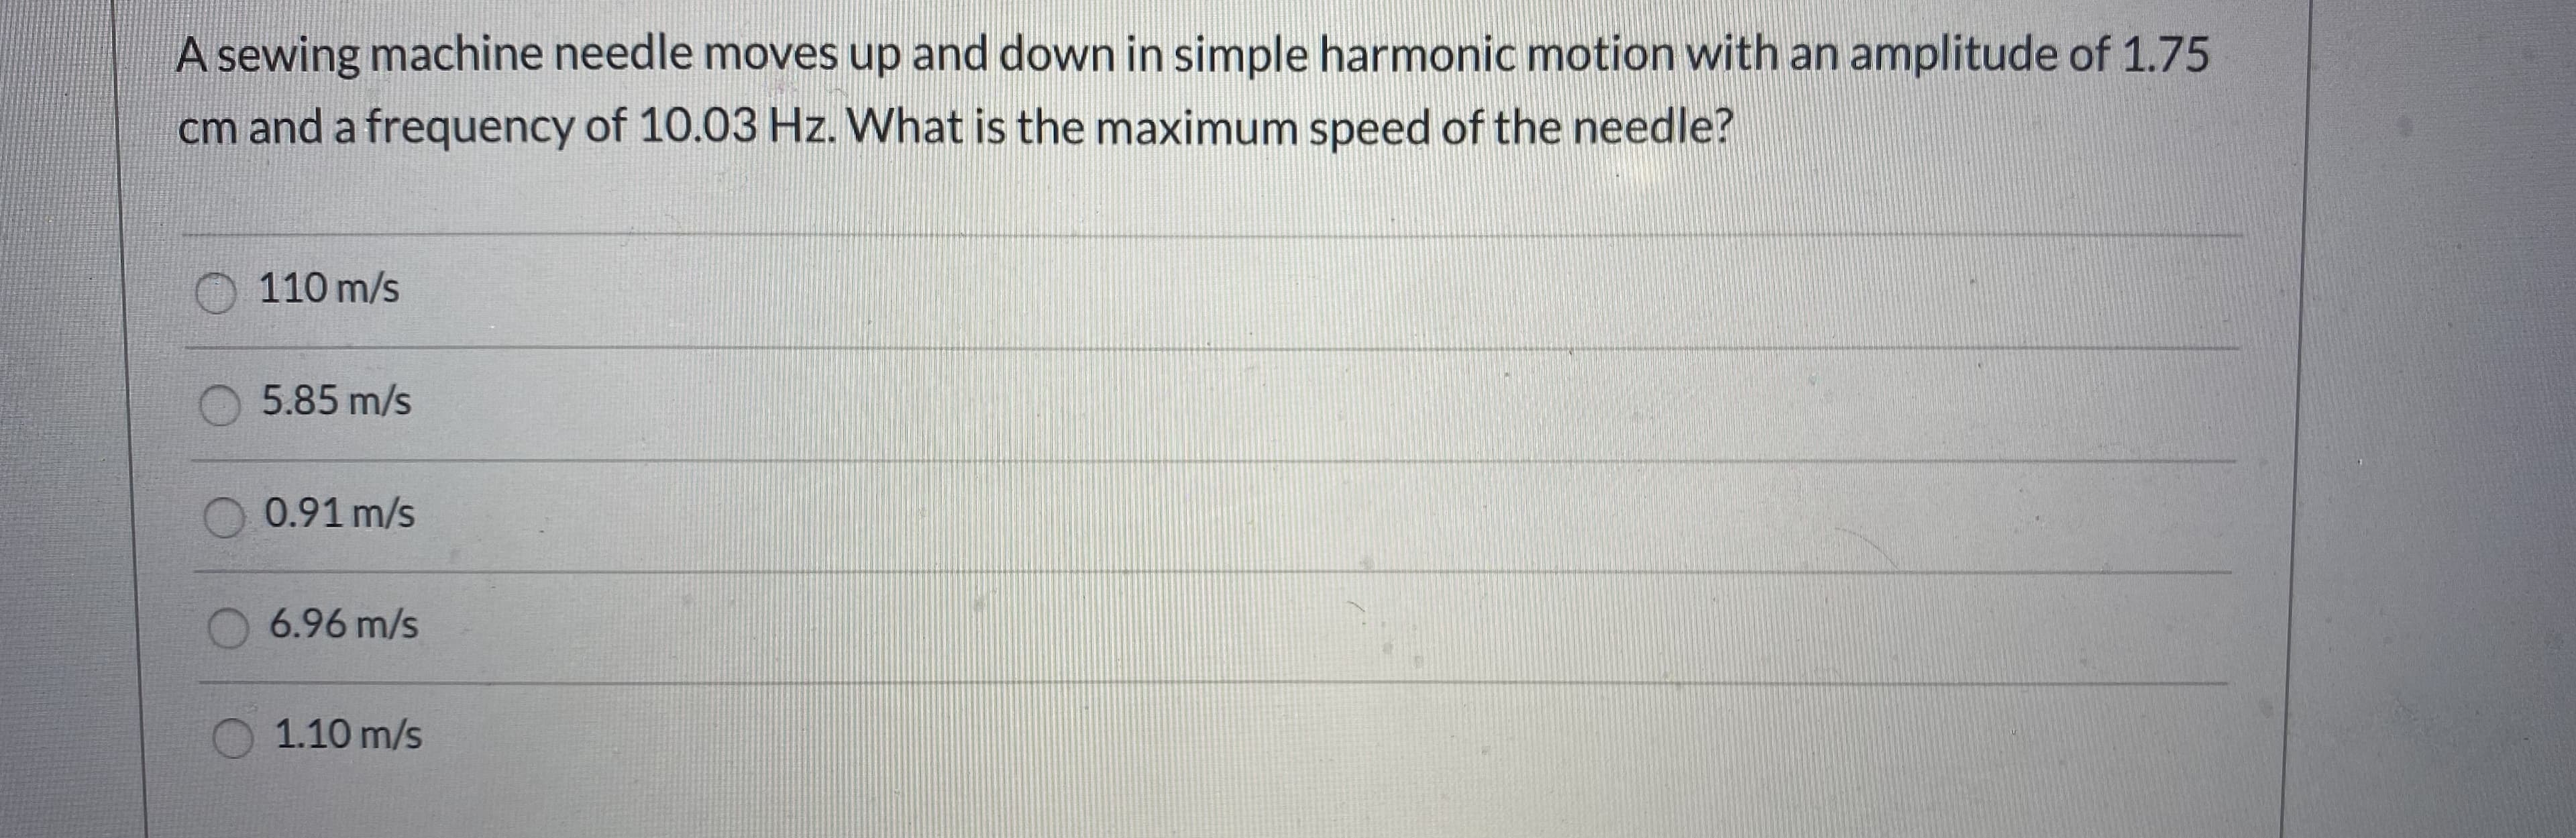 A sewing machine needle moves up and down in simple harmonic motion with an amplitude of 1.75
cm and a frequency of 10.03 Hz. What is the maximum speed of the needle?
110 m/s
O 5.85 m/s
O 0.91 m/s
6.96 m/s
1.10 m/s
